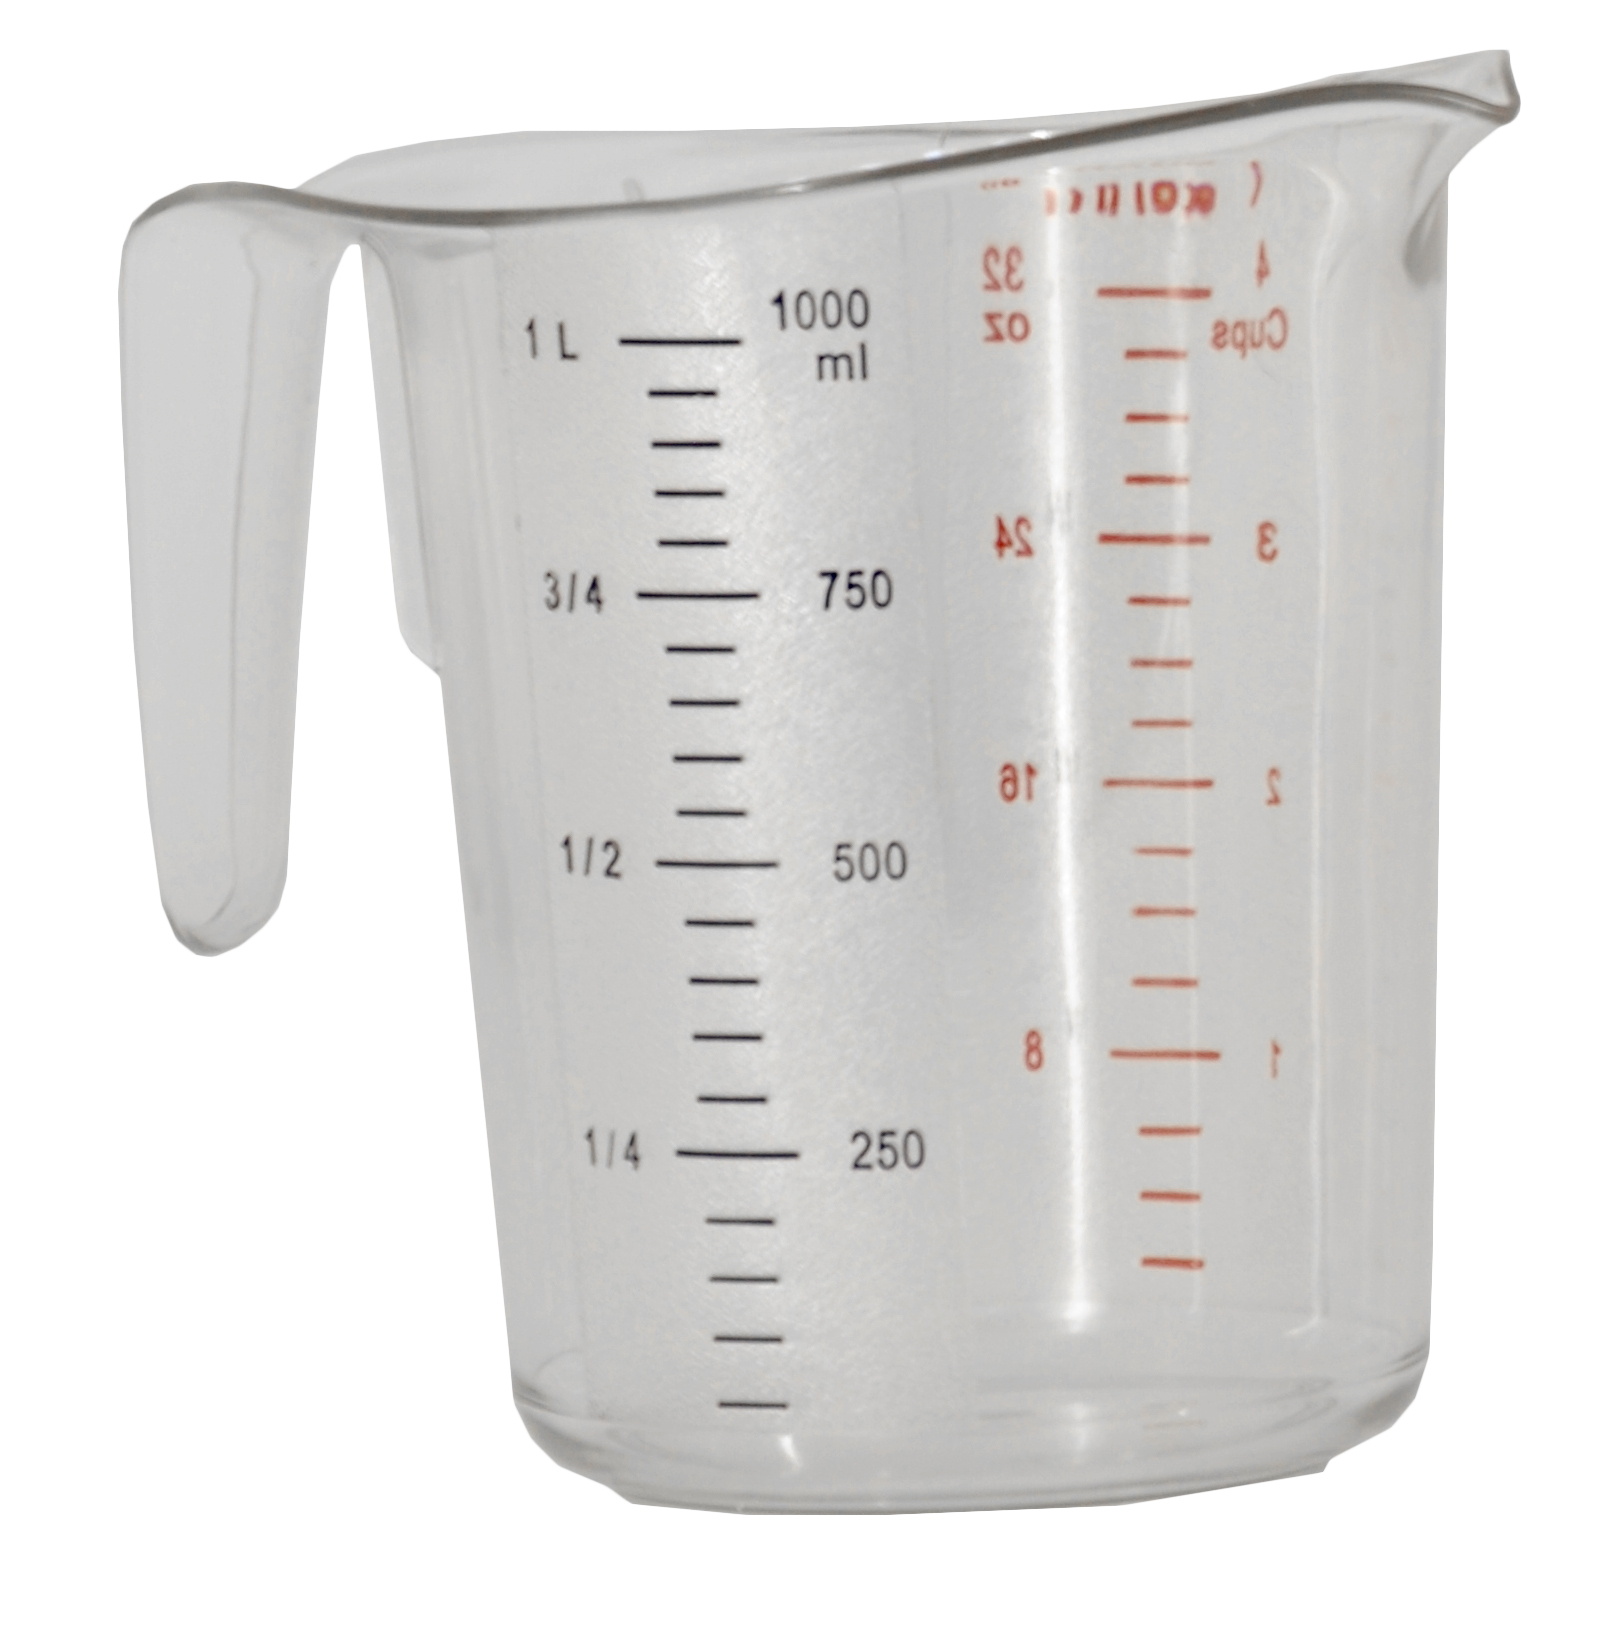 1 QT / 1000 ml Clear Polycarbonate Measuring Cup Omcan